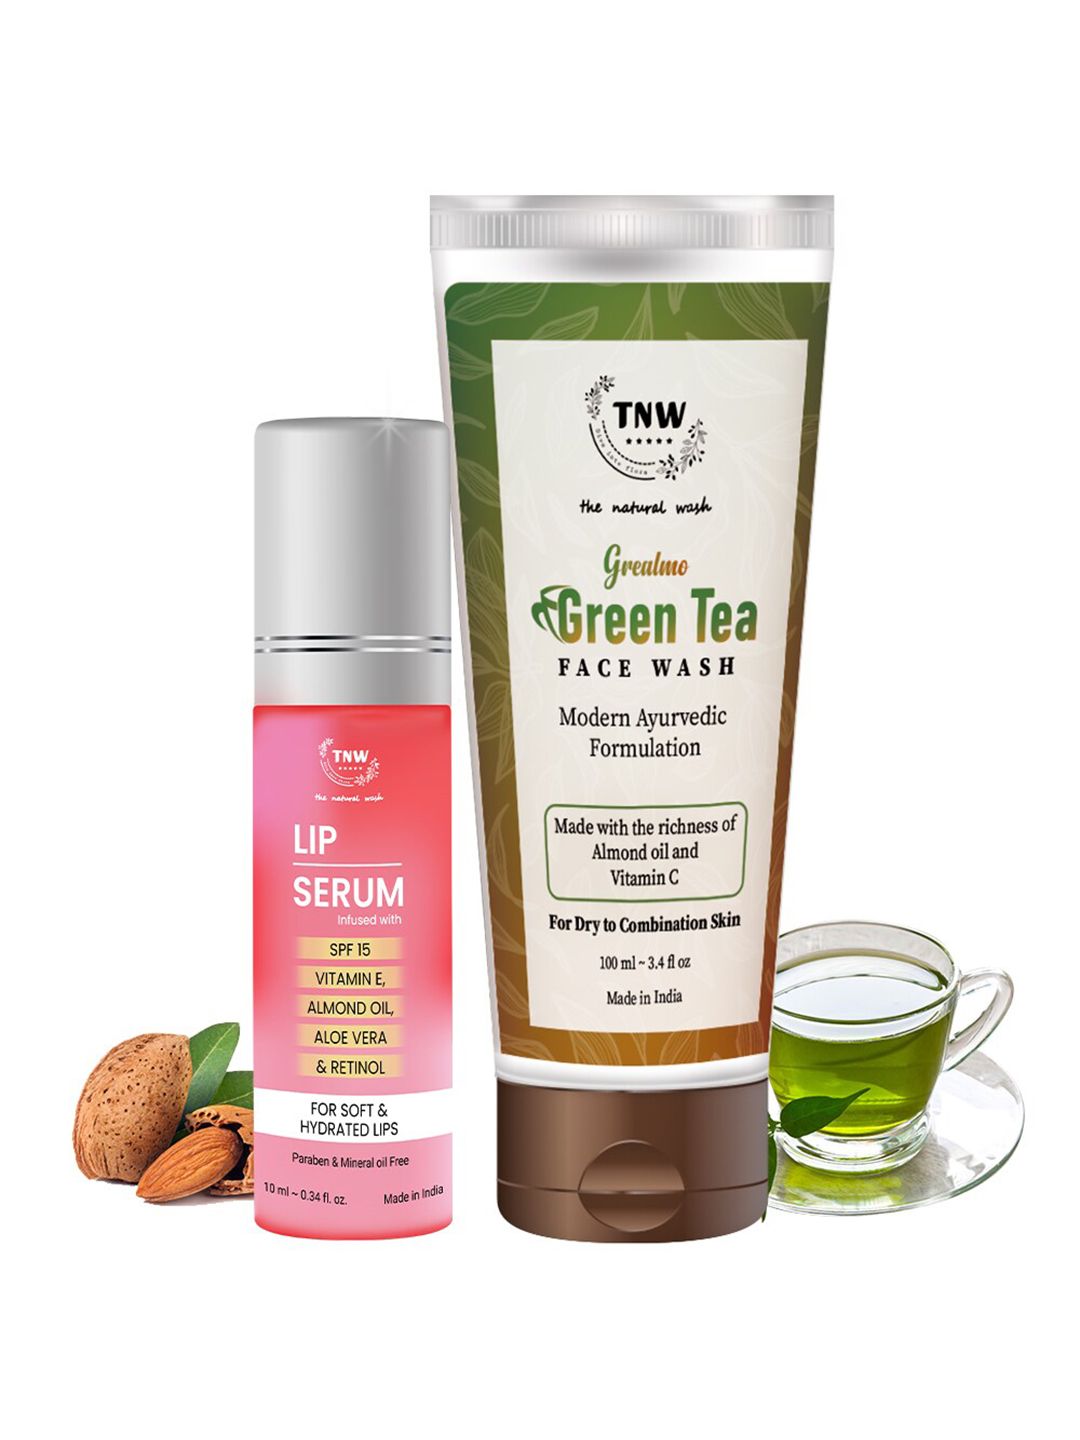 TNW the natural wash Lip Serum and Grealmo Green Tea Face Wash Price in India